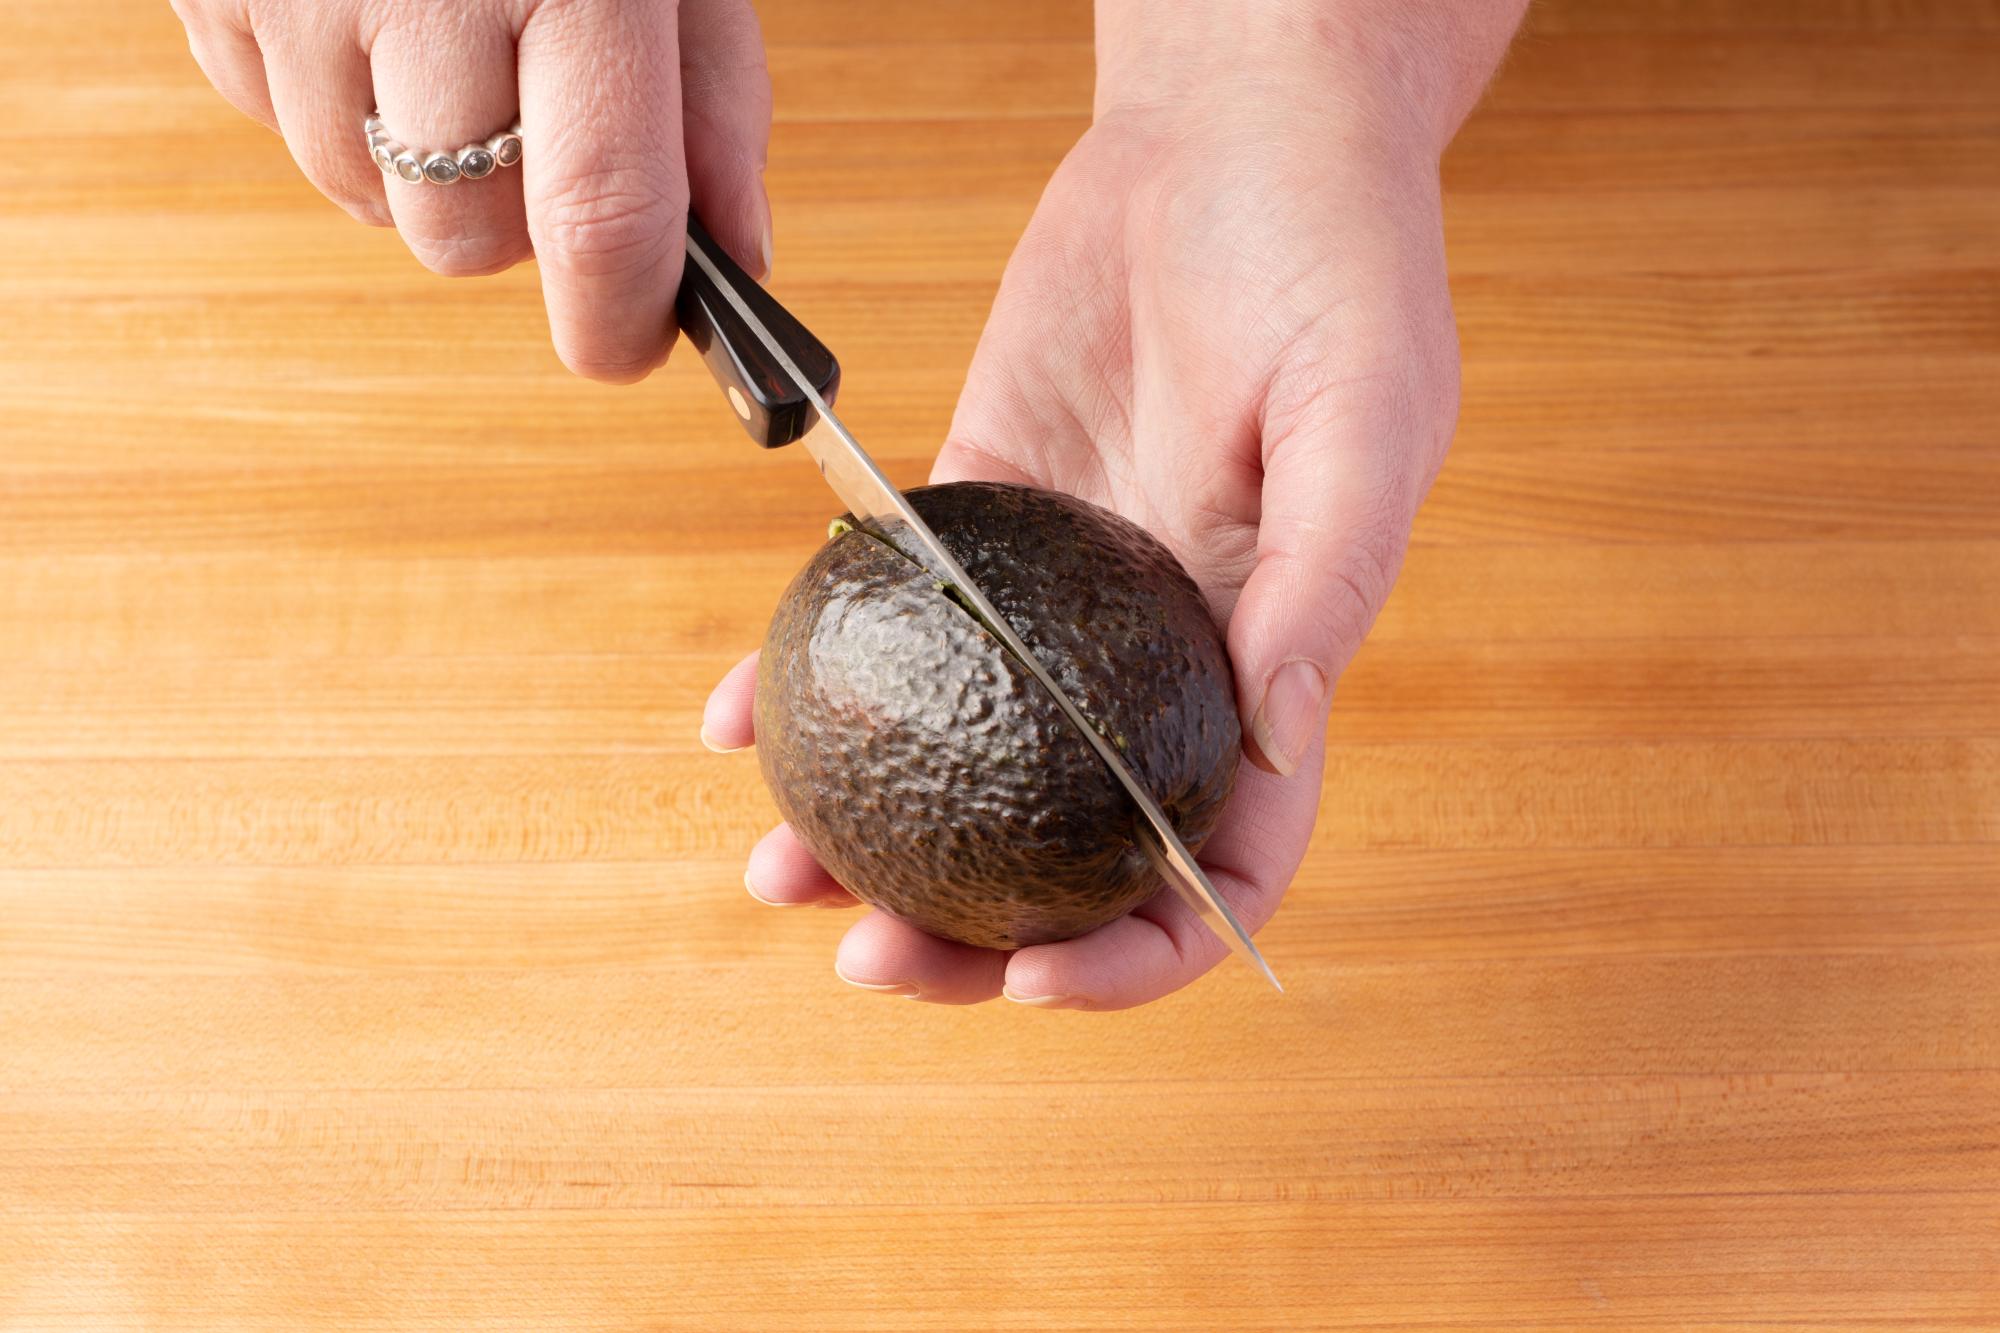 Cut around the avocado with a 4 Inch Paring Knife.